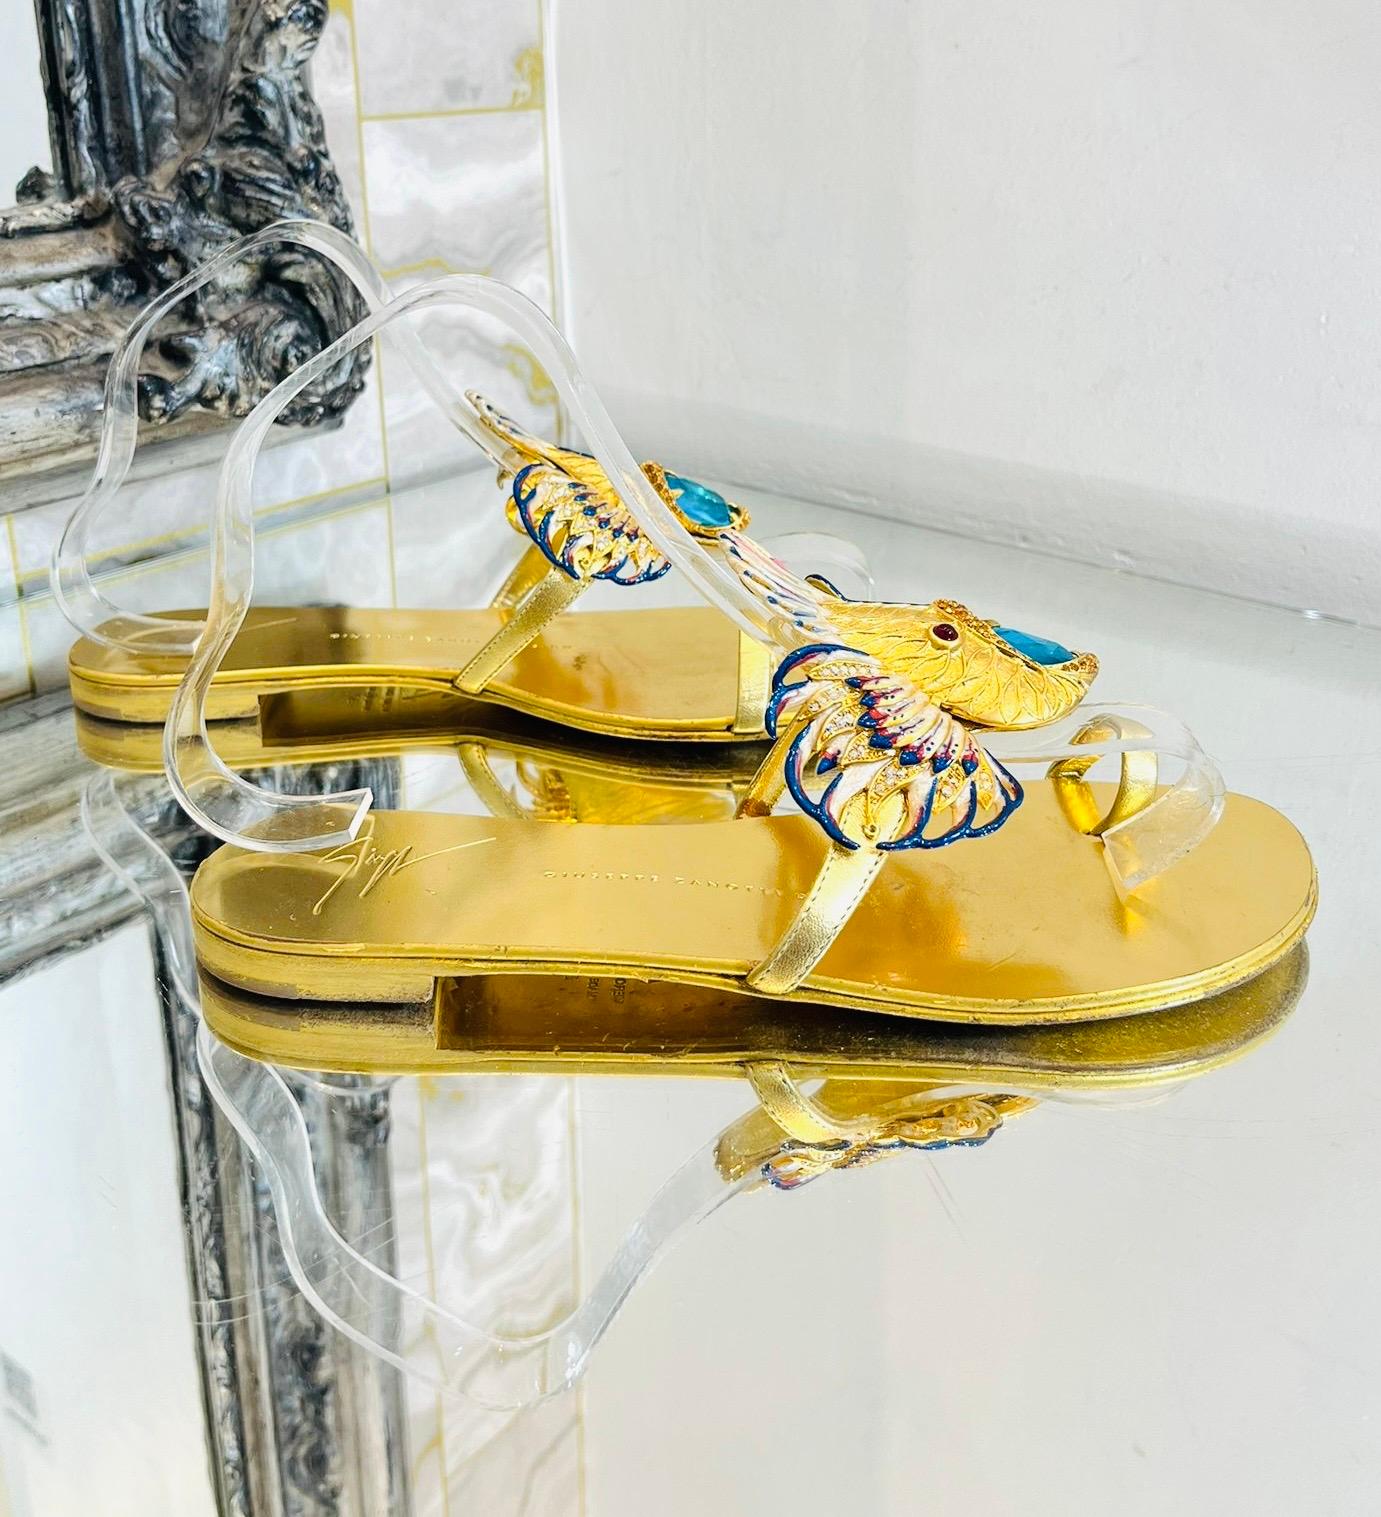 Giuseppe Zanotti Metallic Leather Embellished Sandals In Good Condition For Sale In London, GB